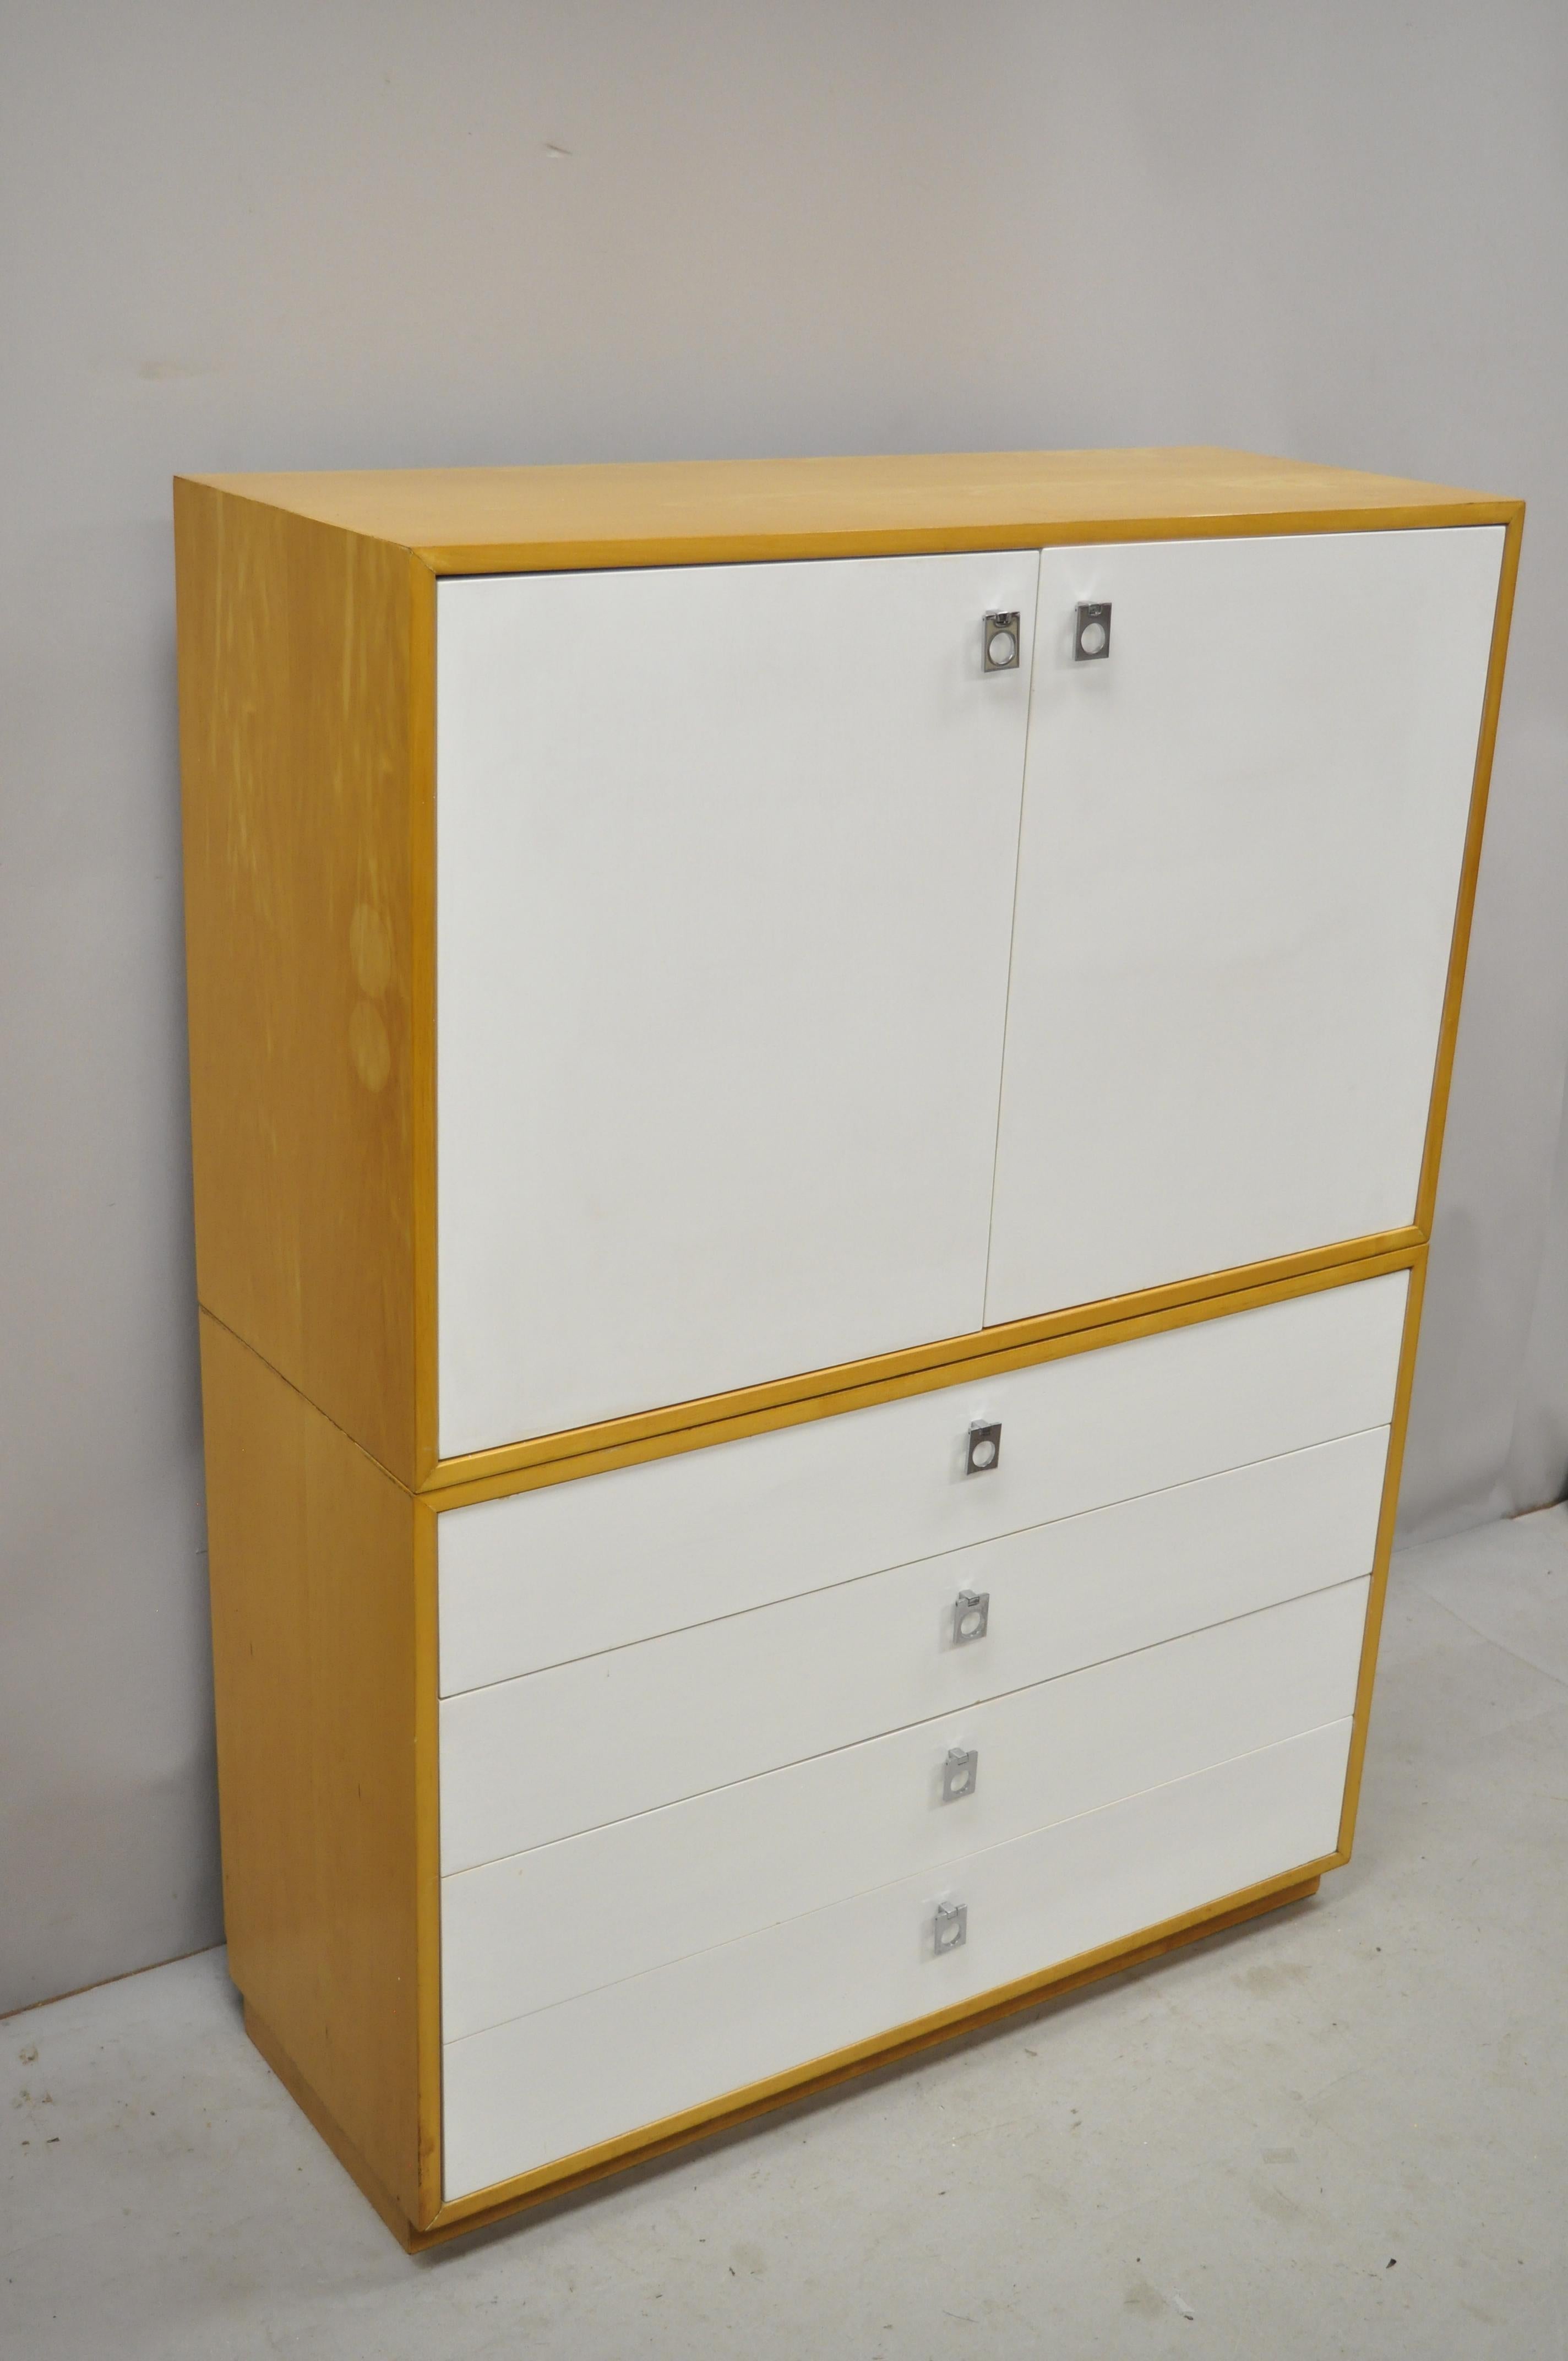 Jack Cartwright for Founders Mid-Century Modern birch wood tall chest dresser cabinet. Item features 2 part construction, 2 swing doors, white lacquered drawer fronts, original label, 4 dovetailed drawers, clean modernist lines, great style and